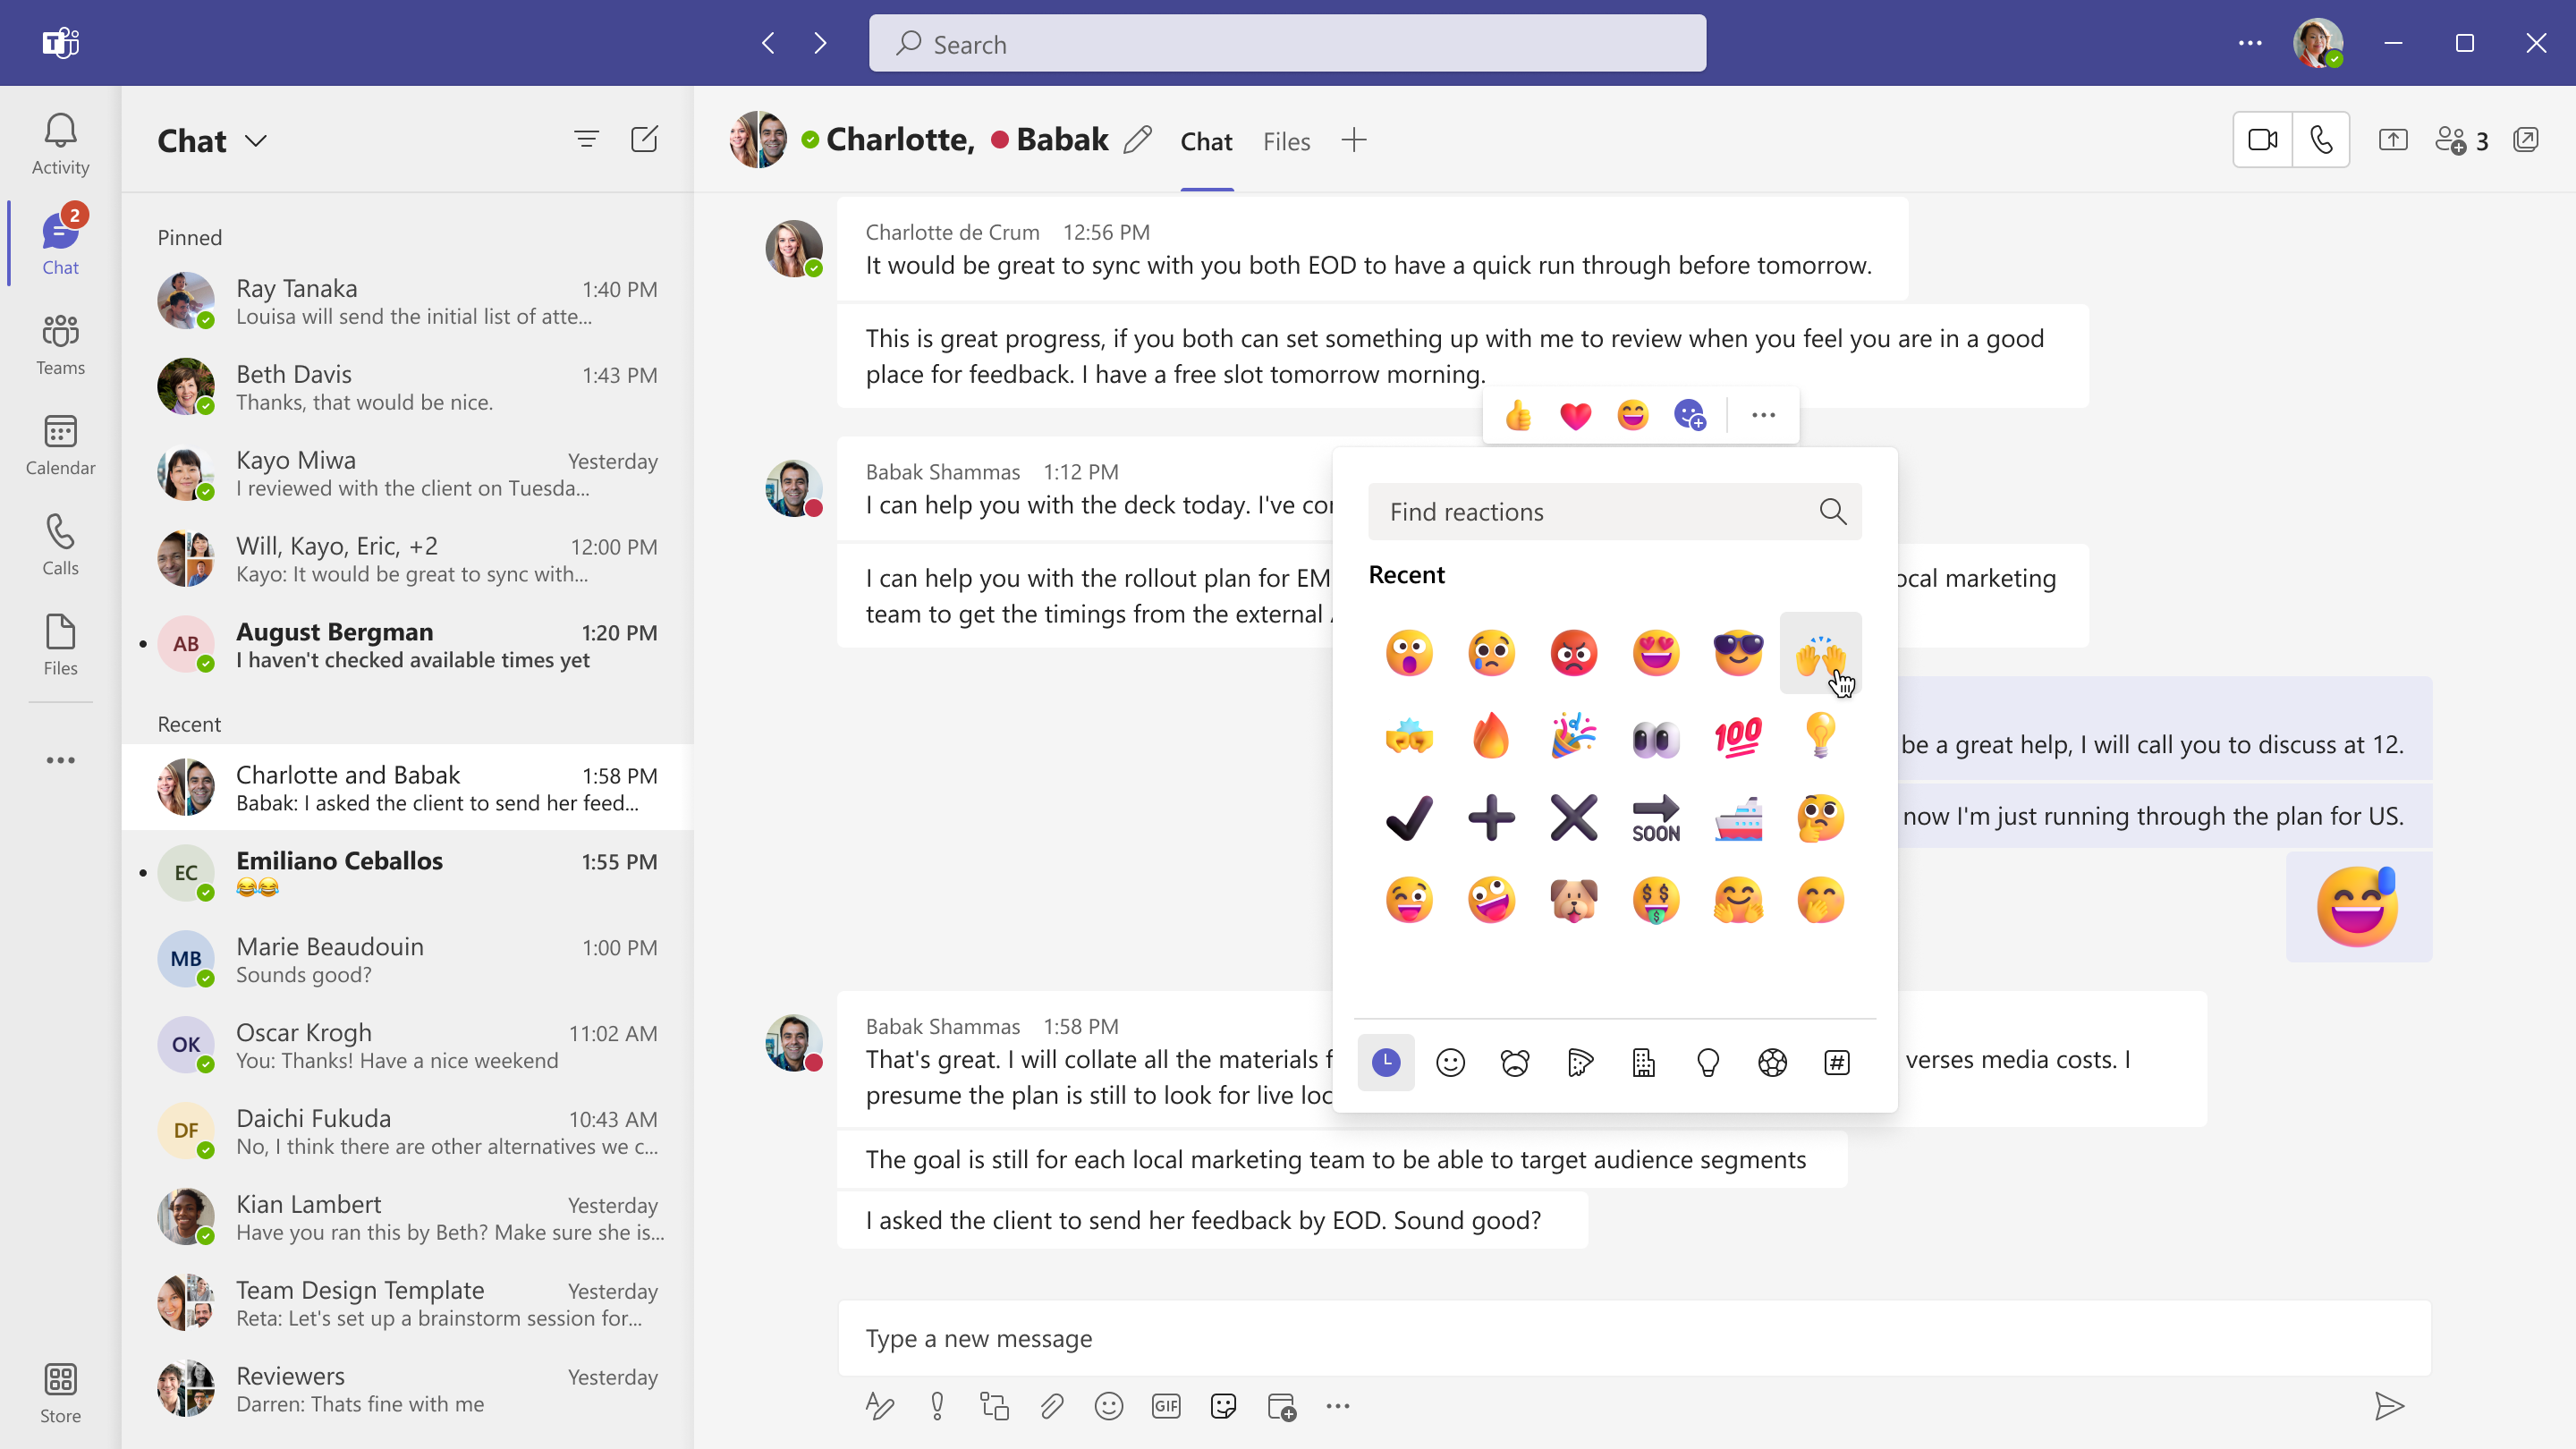 You can apply any emoji as a reaction to chat or channels messages in Teams - OnMSFT.com - September 29, 2022